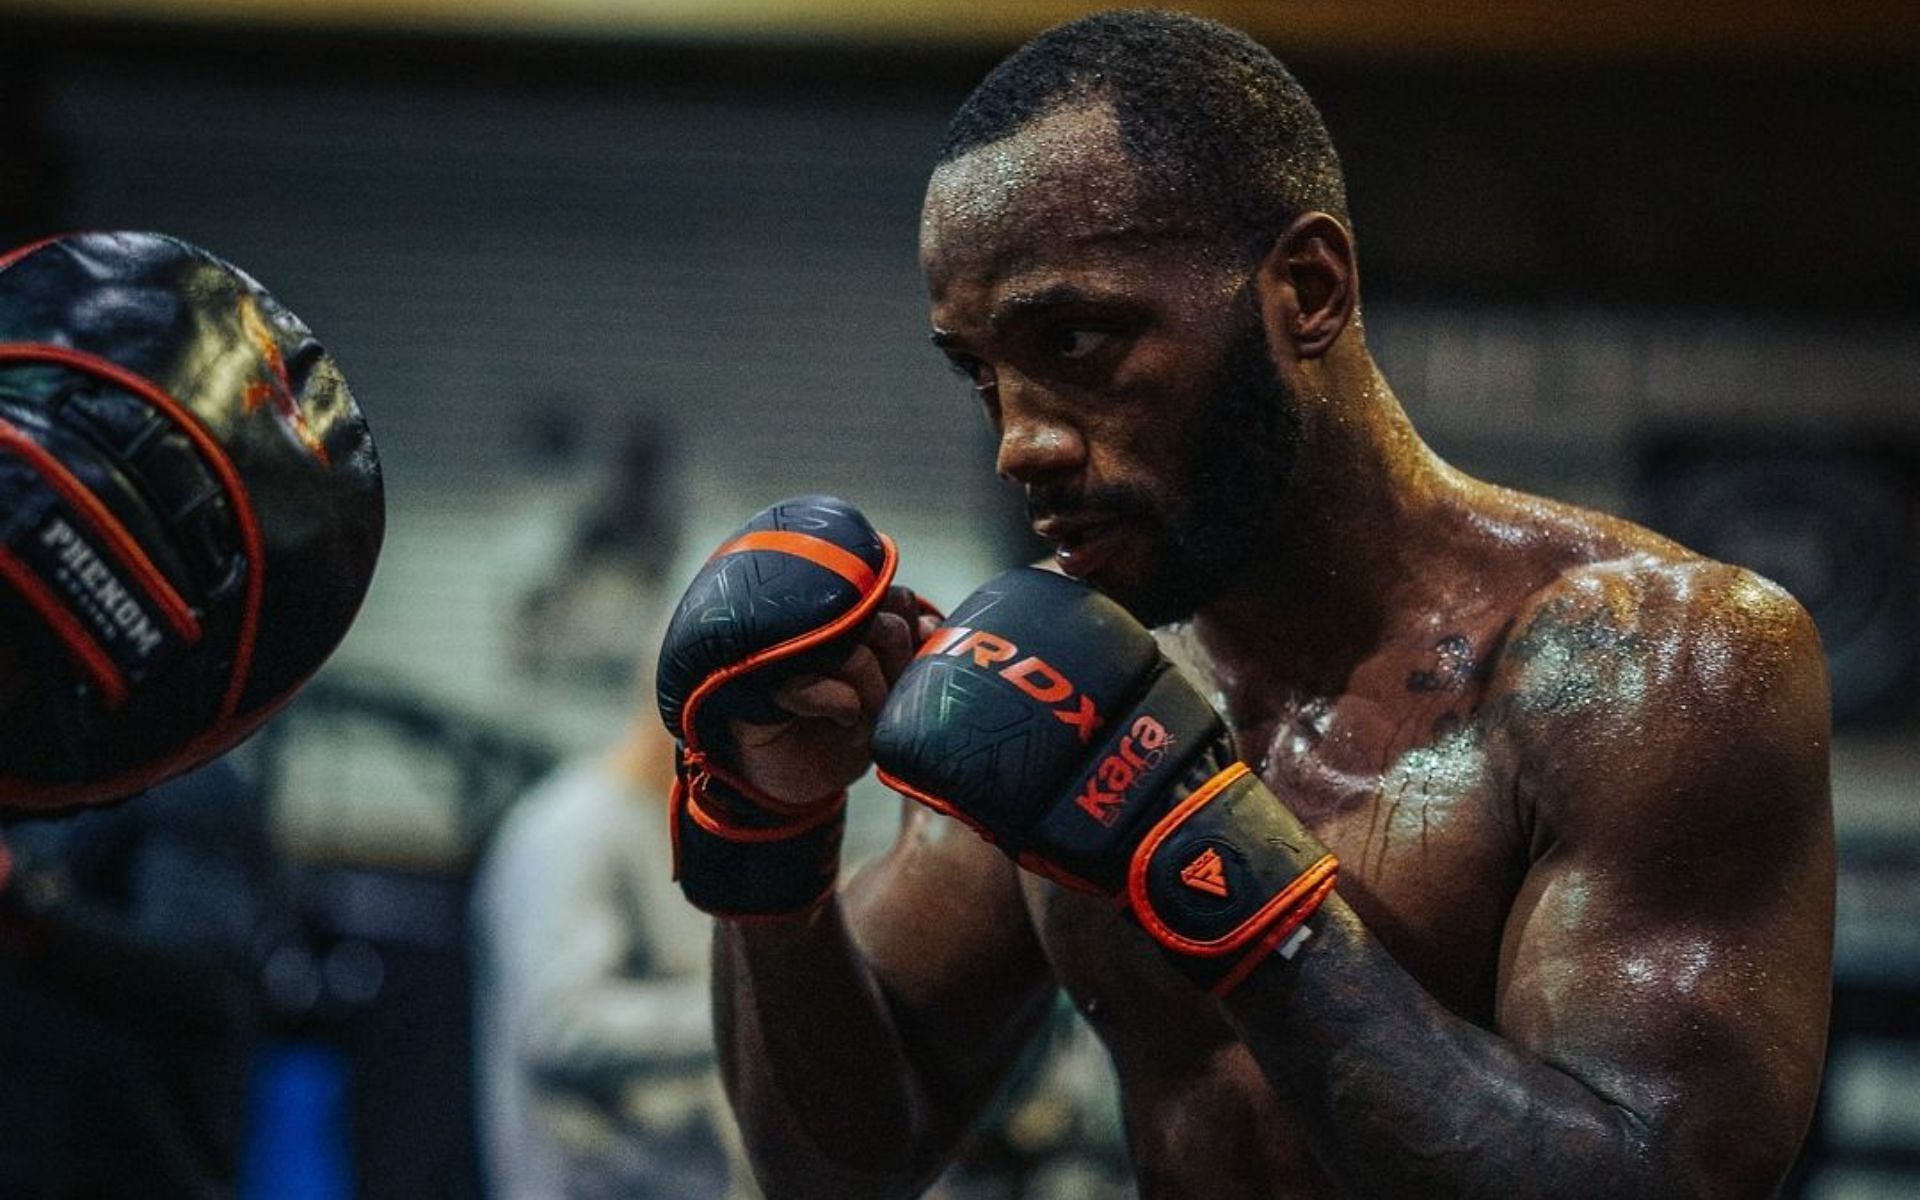 Leon Edwards reveals he likes watching boxing more than MMA